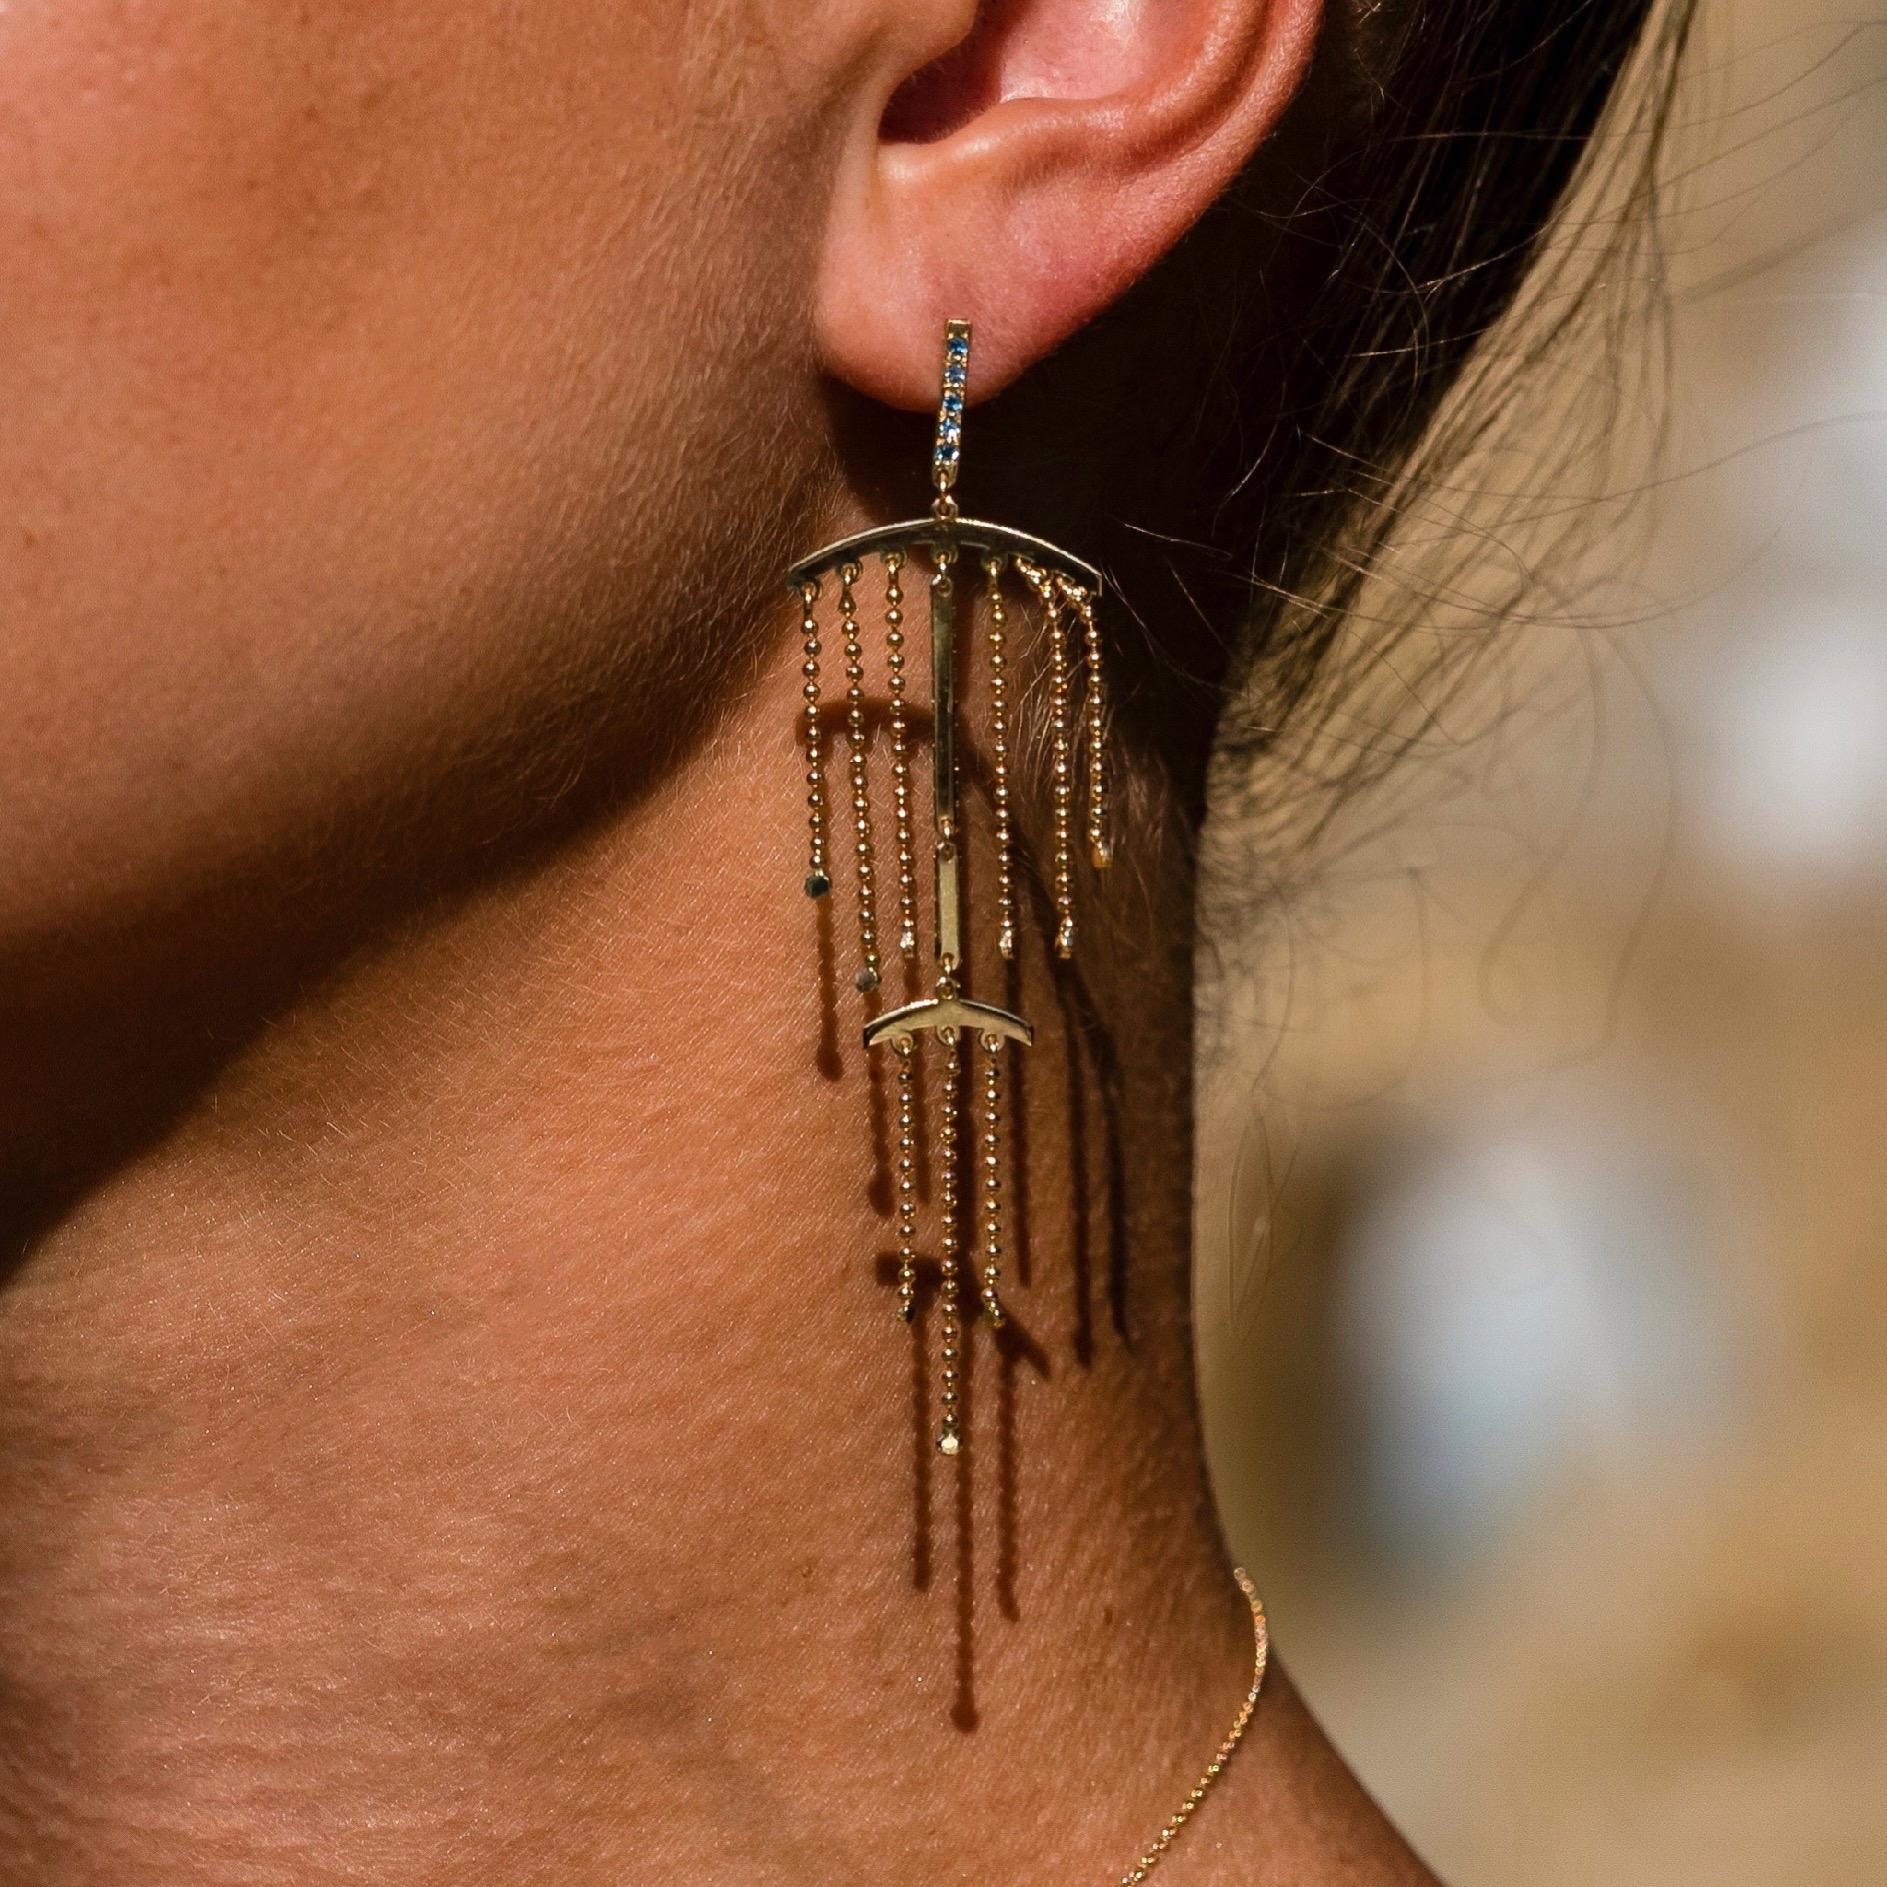 The ‘Double fringe’, chandelier earrings are crafted in 18K yellow gold, hallmarked in Cyprus. These impressive, playful dangle earrings feel light on the ear and are very comfortable to wear. They come in a highly polished finish and feature 0,2